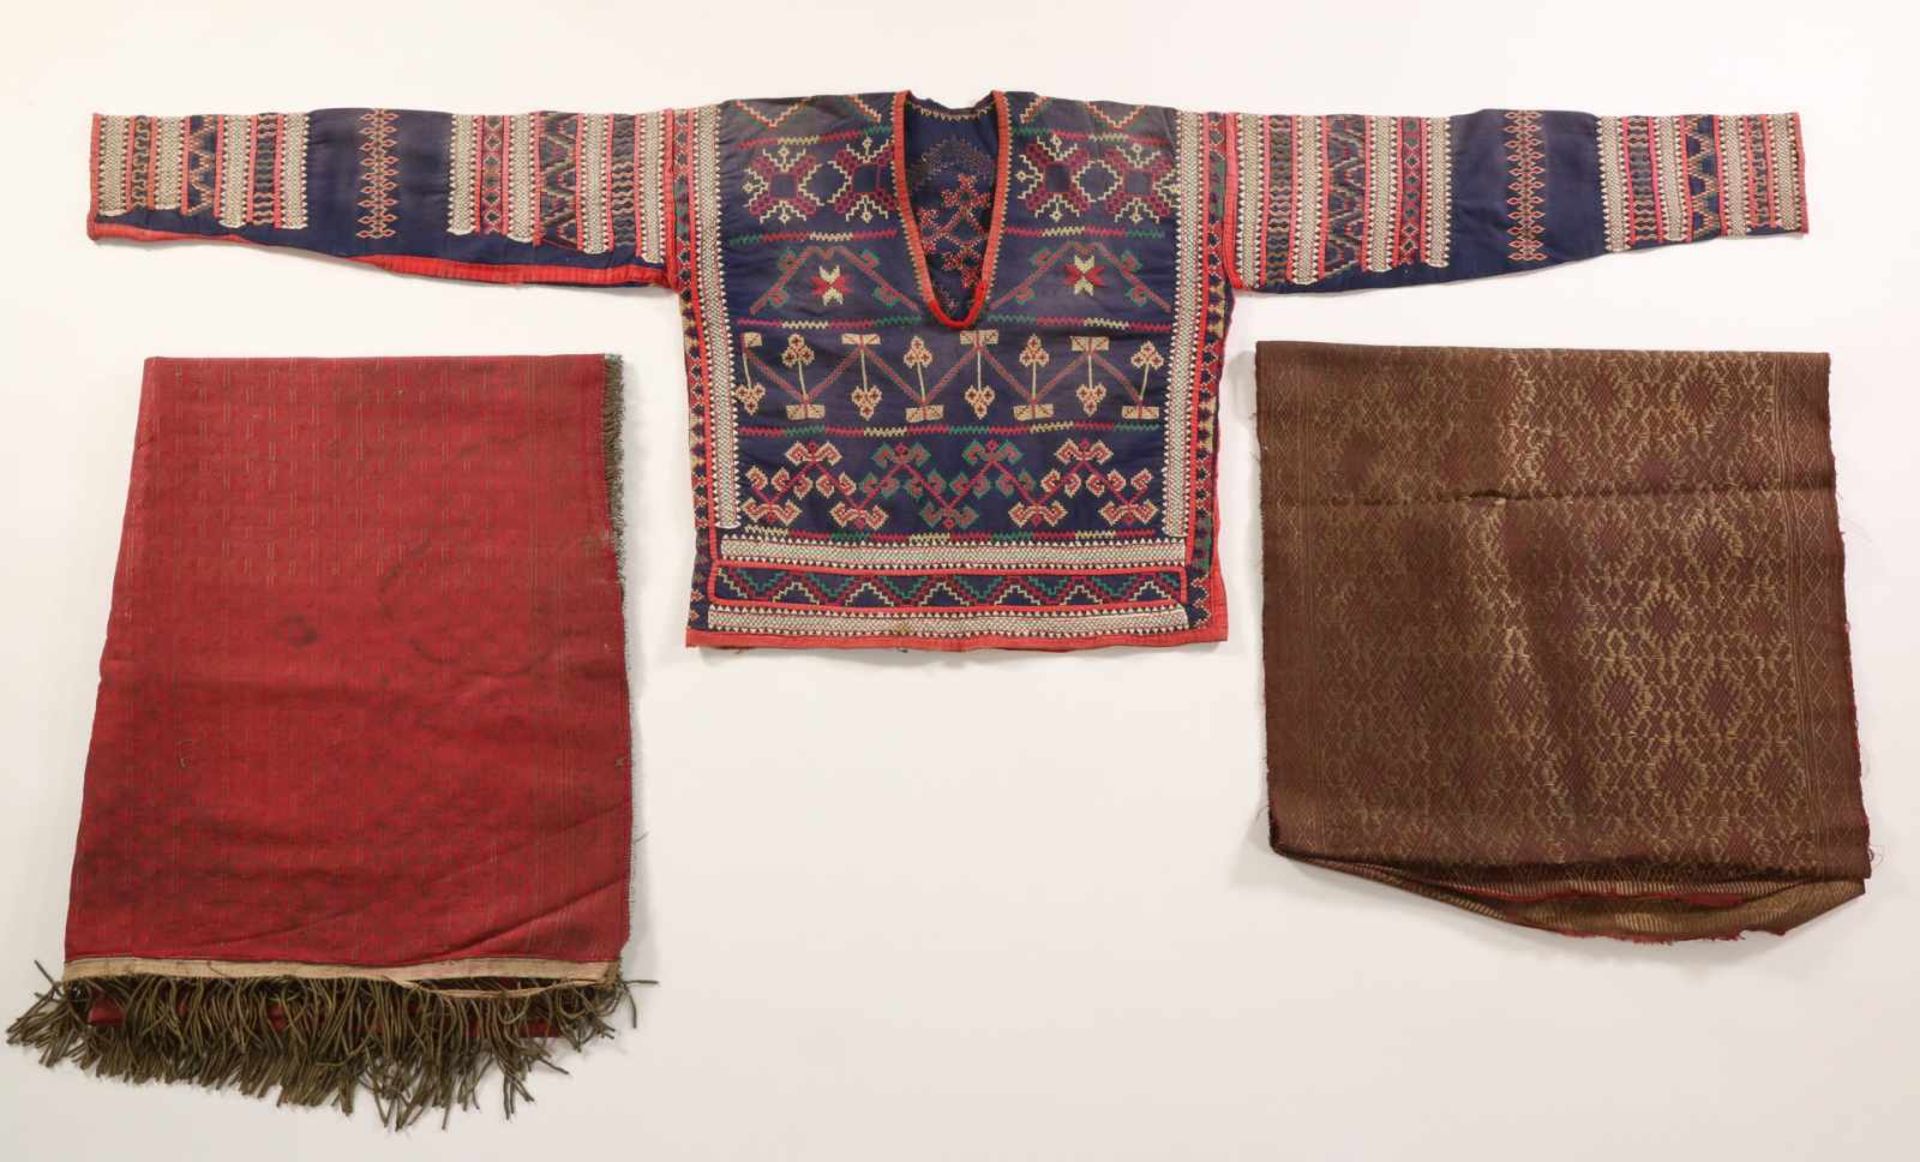 Philipinnes, four textiles, a Mindanao jacket and a brown Ikat clothMinagkabau, a red cloth with